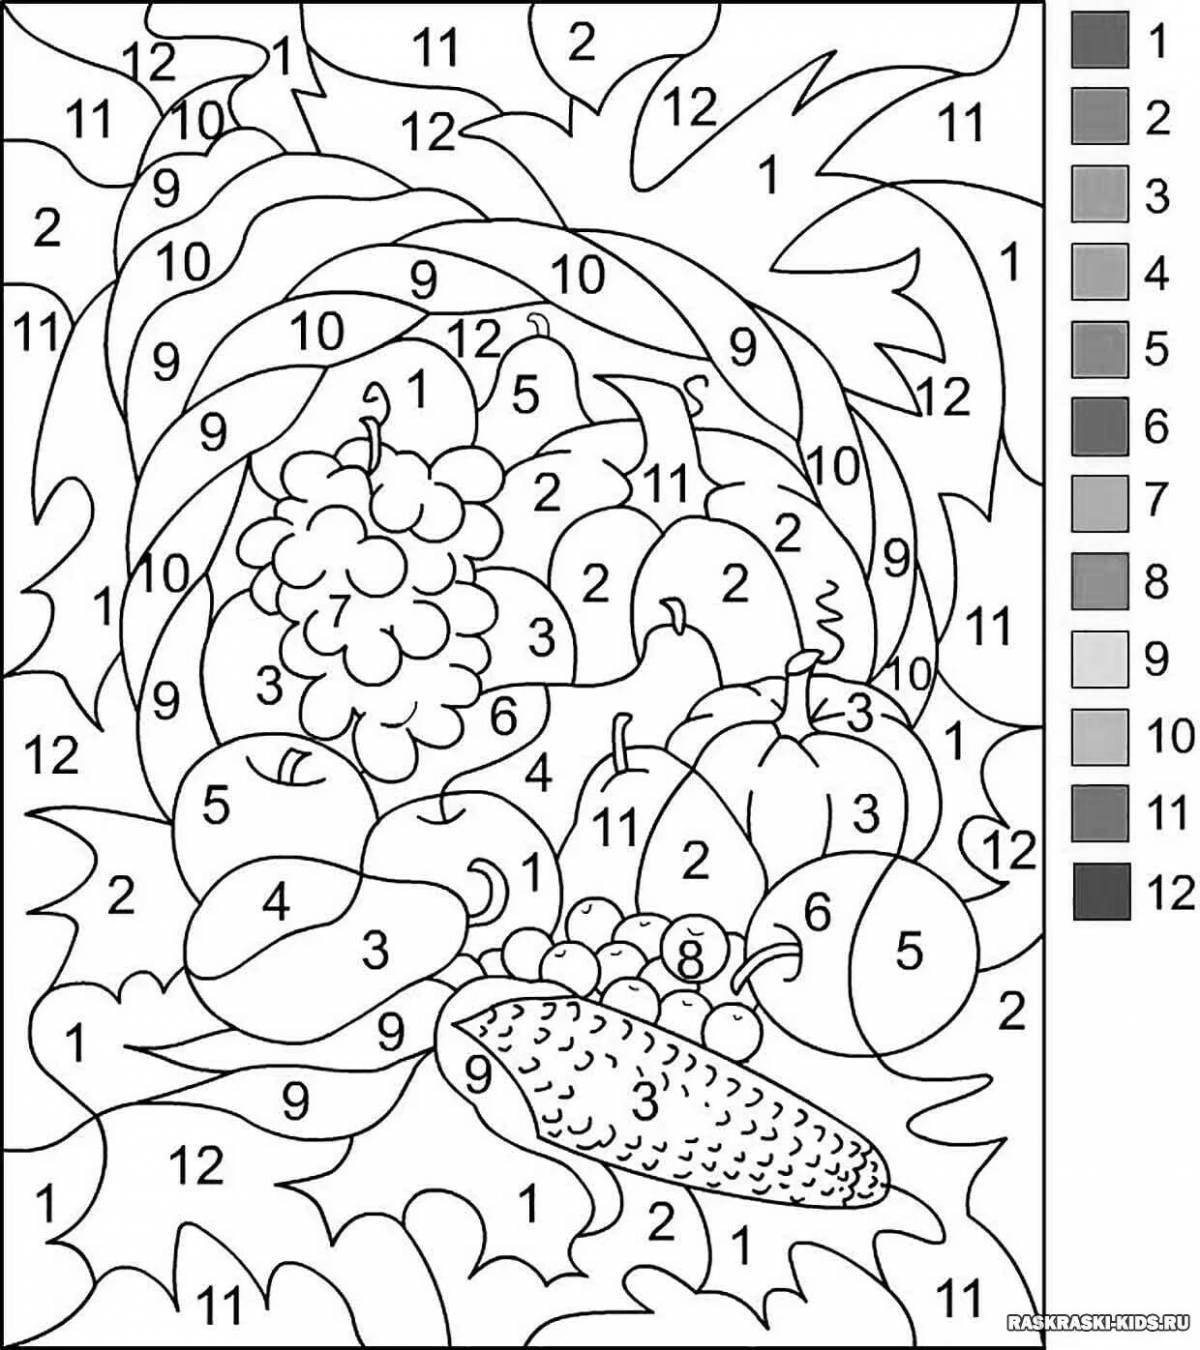 Stimulating coloring by numbers for 8-9 year olds